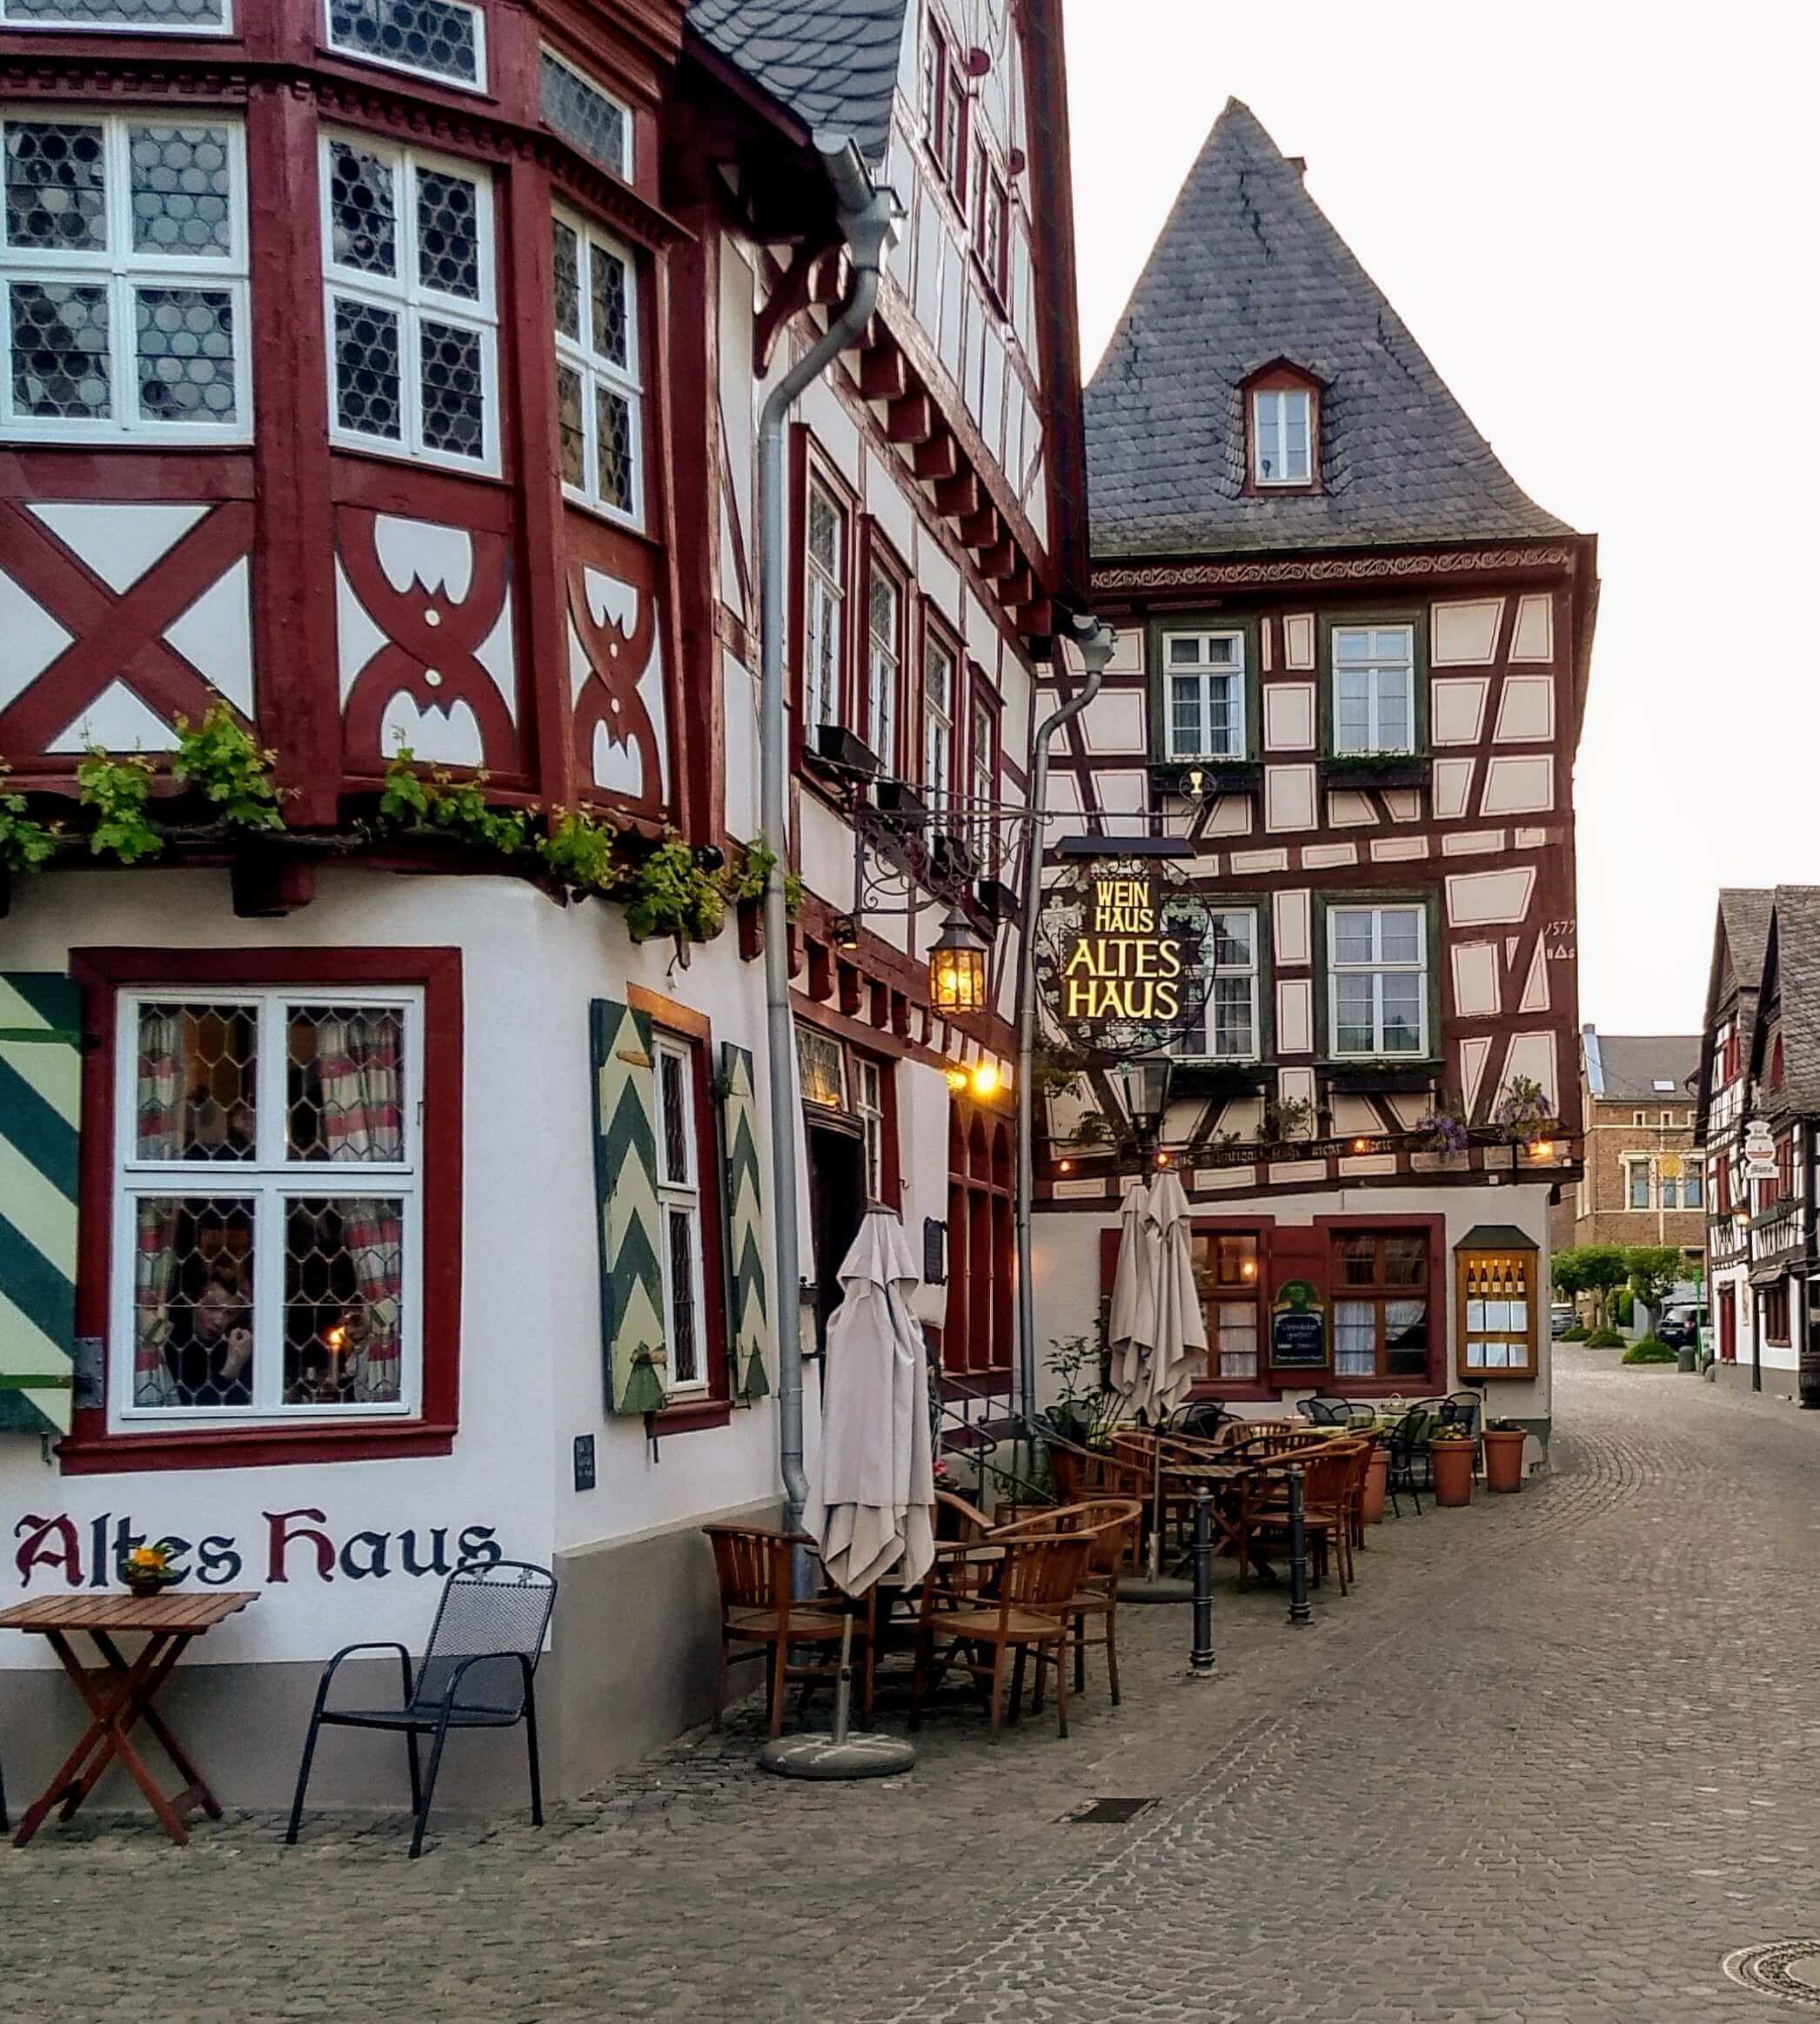 historic Altes Haus medieval timber-frame restaurant in Bacharach Rhine Valley Germany